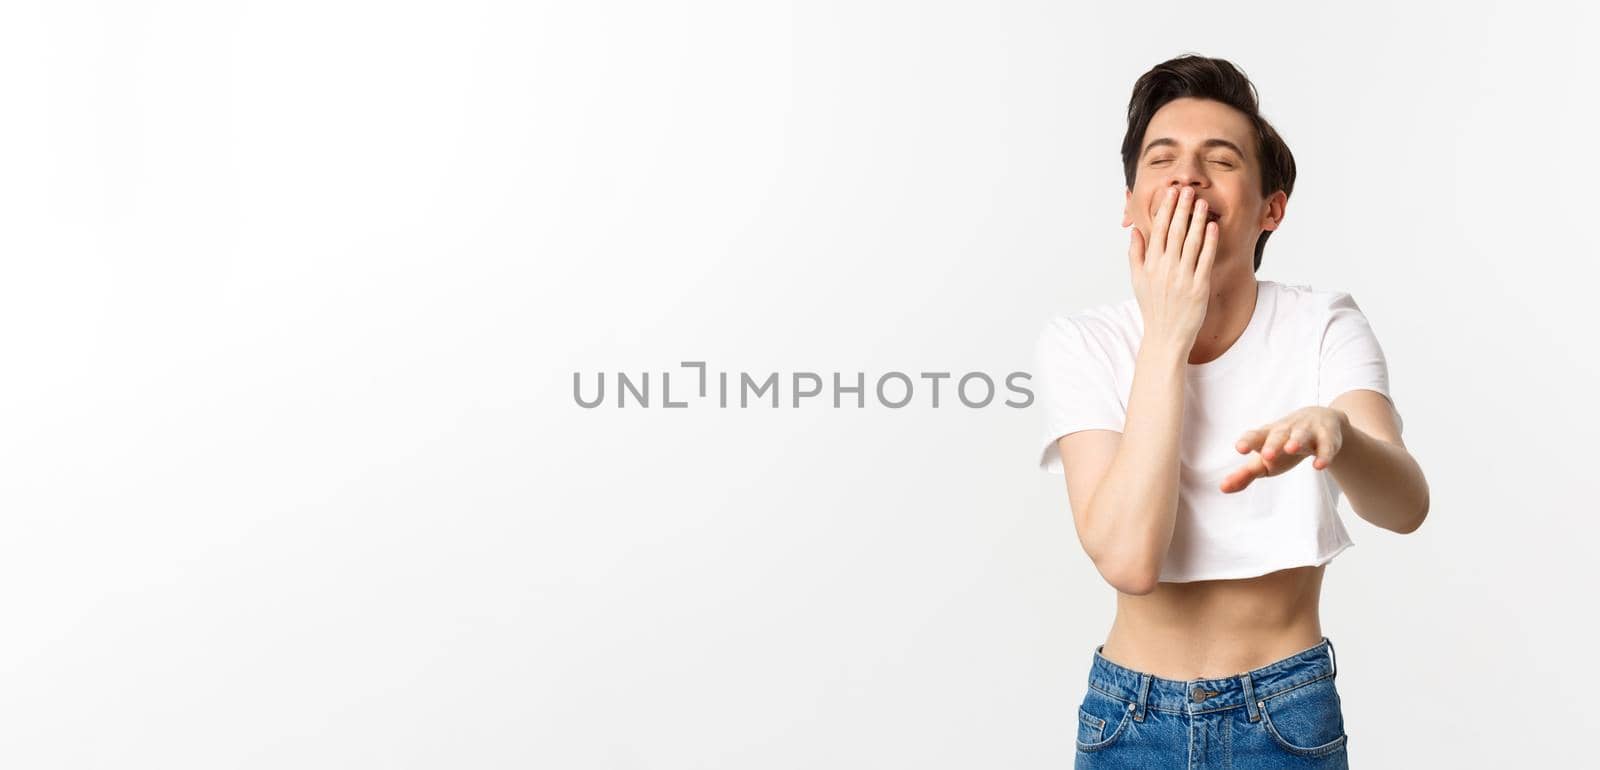 Lgbtq and pride concept. Image of silly gay man in crop top laughing and pointing hand at camera, chuckle over funny joke, white background.